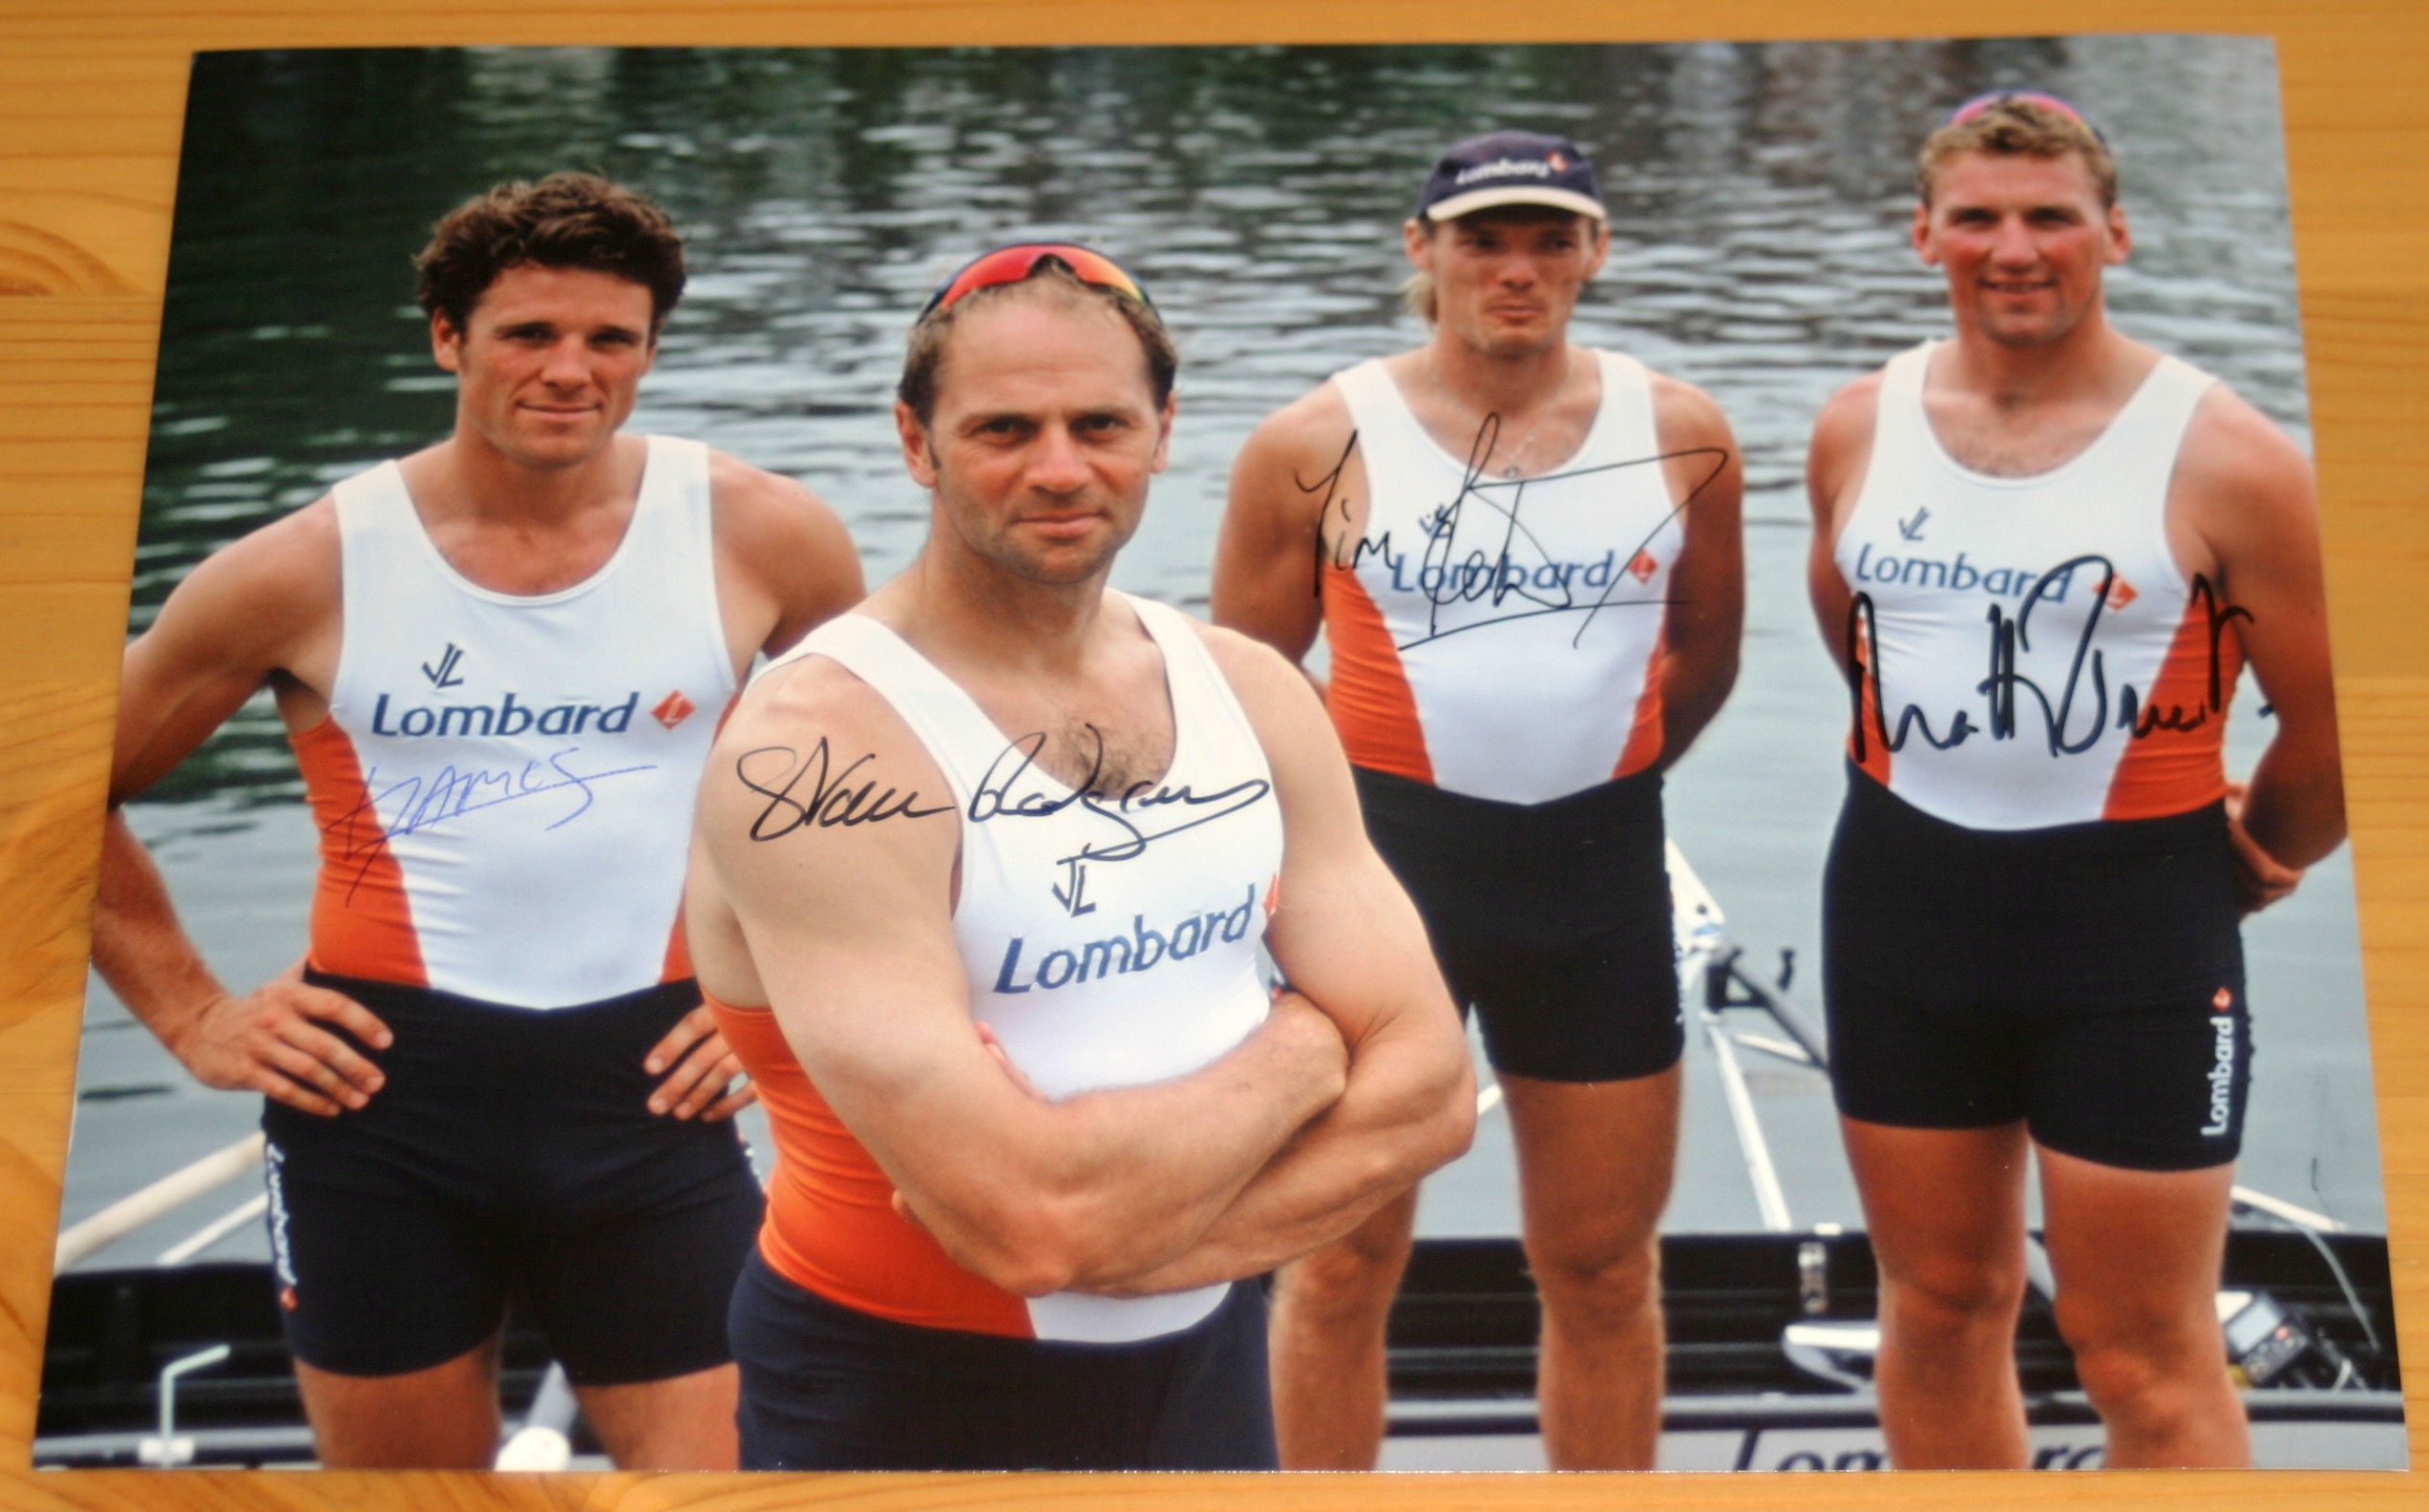 8 x 6 inch colour photograph signed by Sir Steve Redgrave  Matthew Pinsent  James Cracknell and Tim